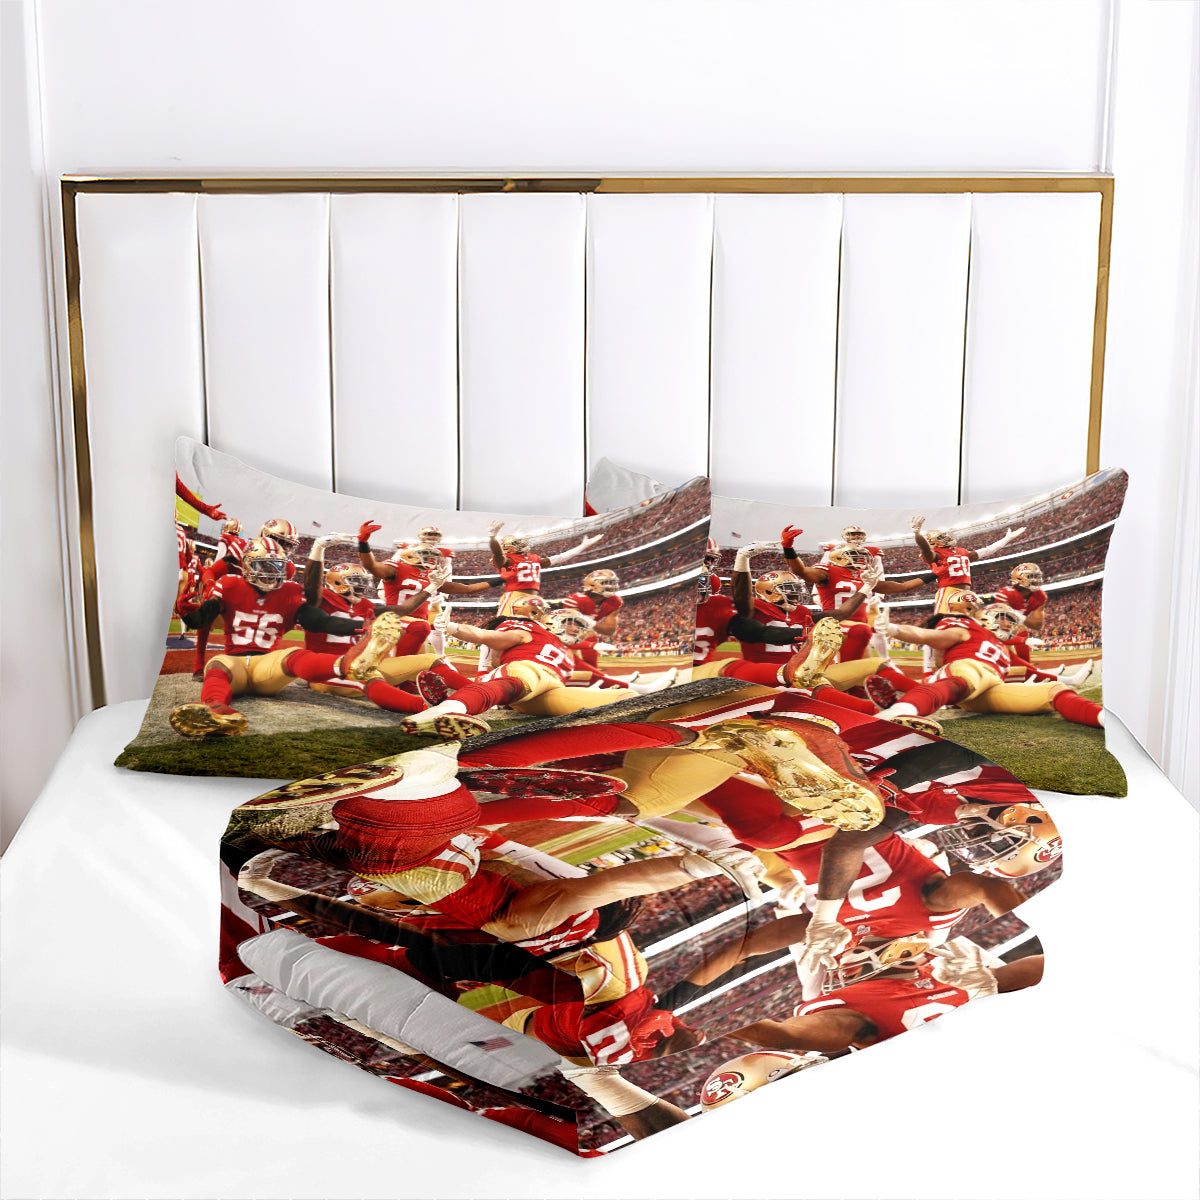 San Francisco Rugby 49ers Comforter Pillowcases 3PC Sets Blanket All Season Reversible Quilted Duvet